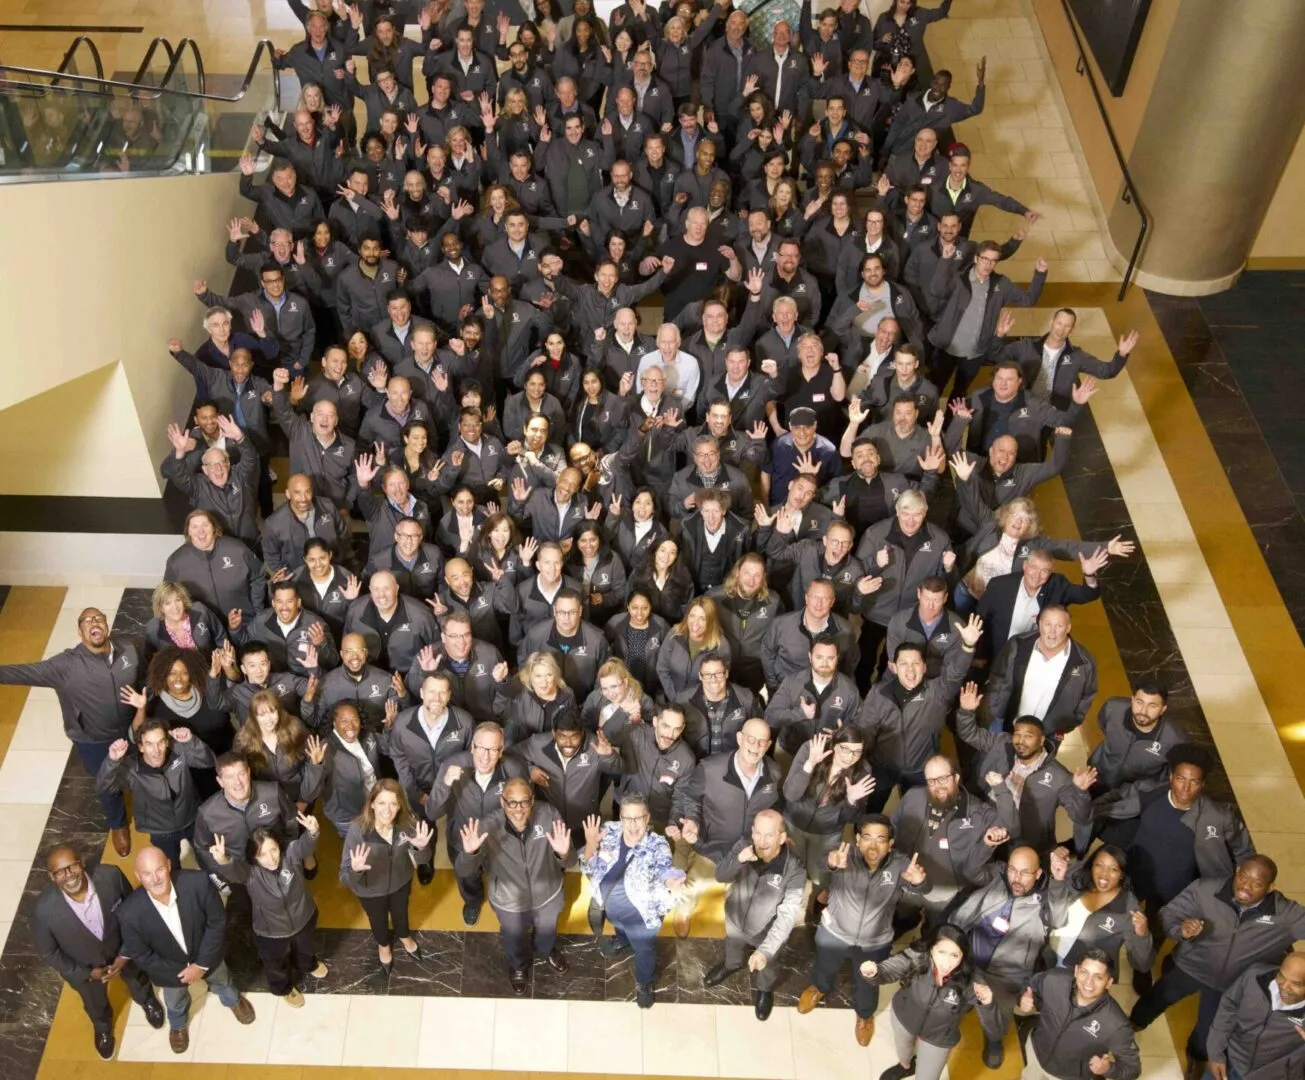 a large group of people in suits and ties